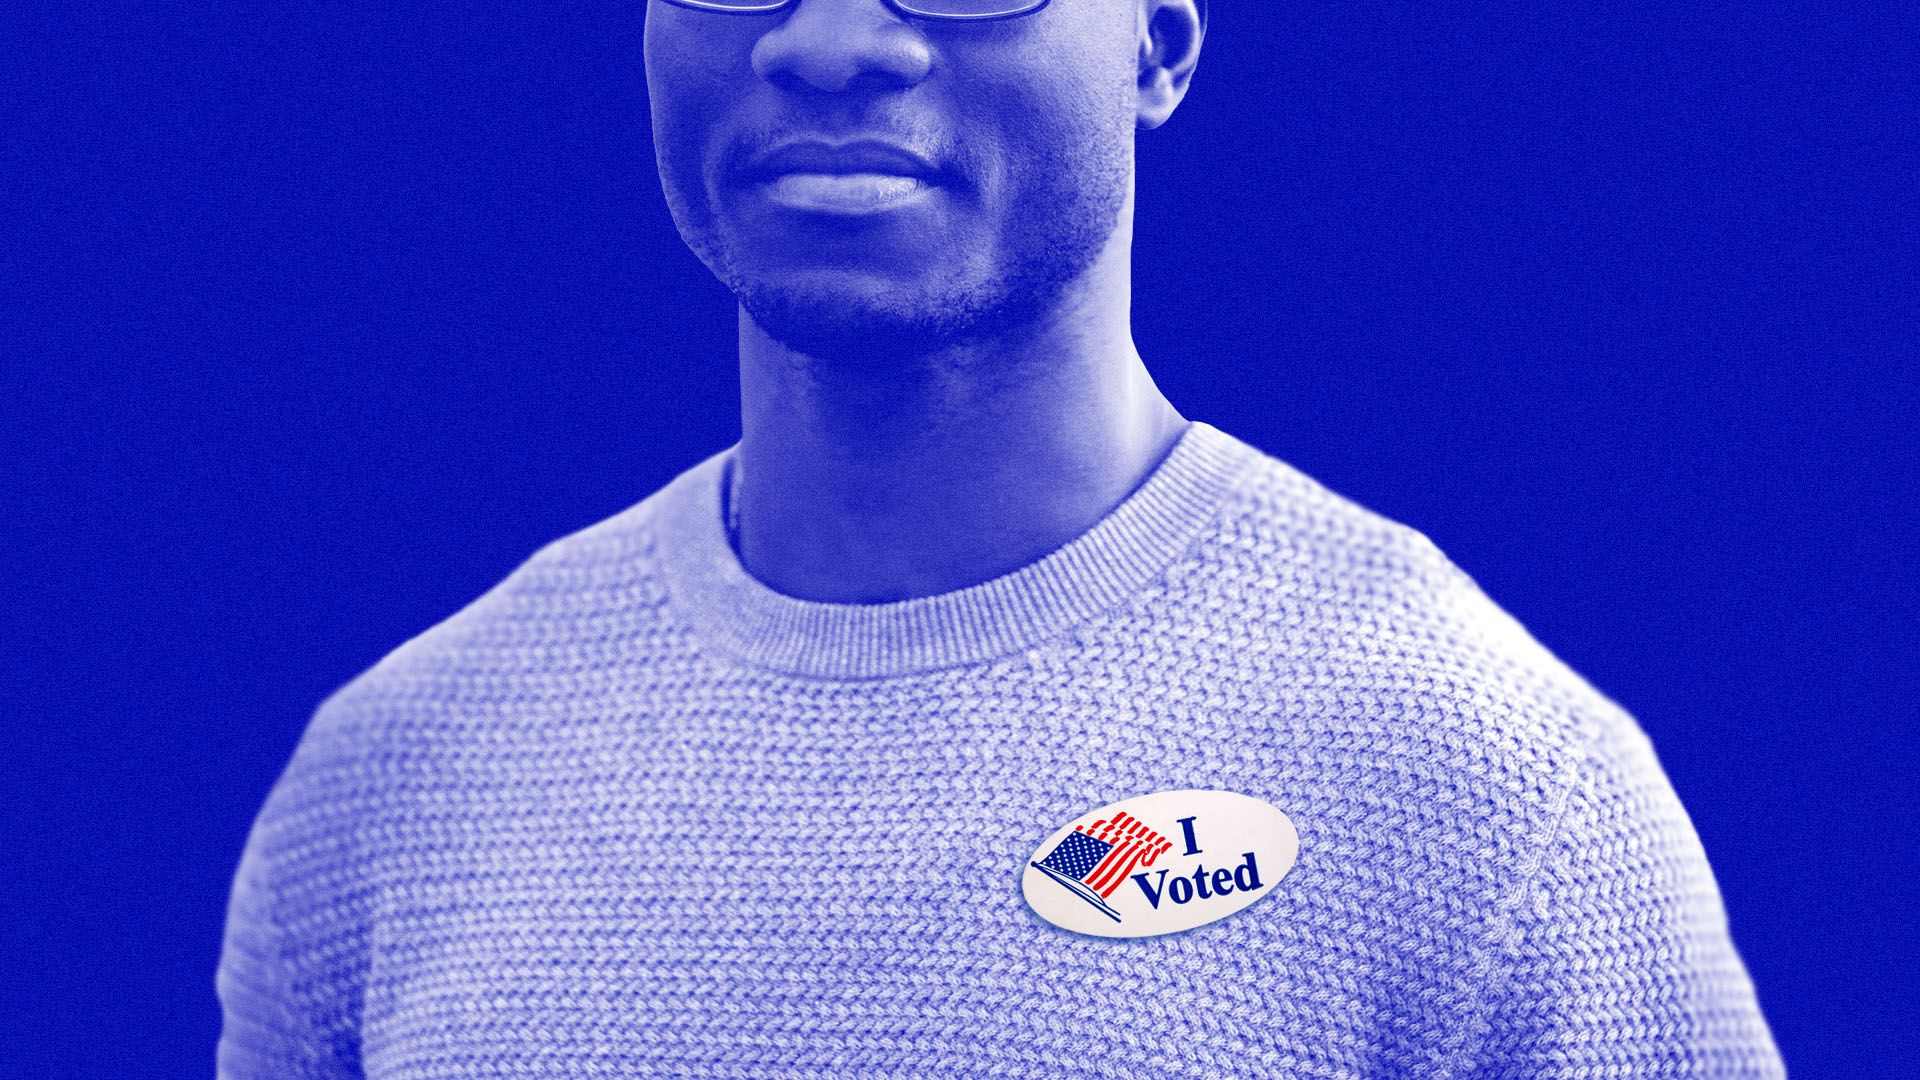  Illustration of an African American man on a blue background wearing an I voted sticker